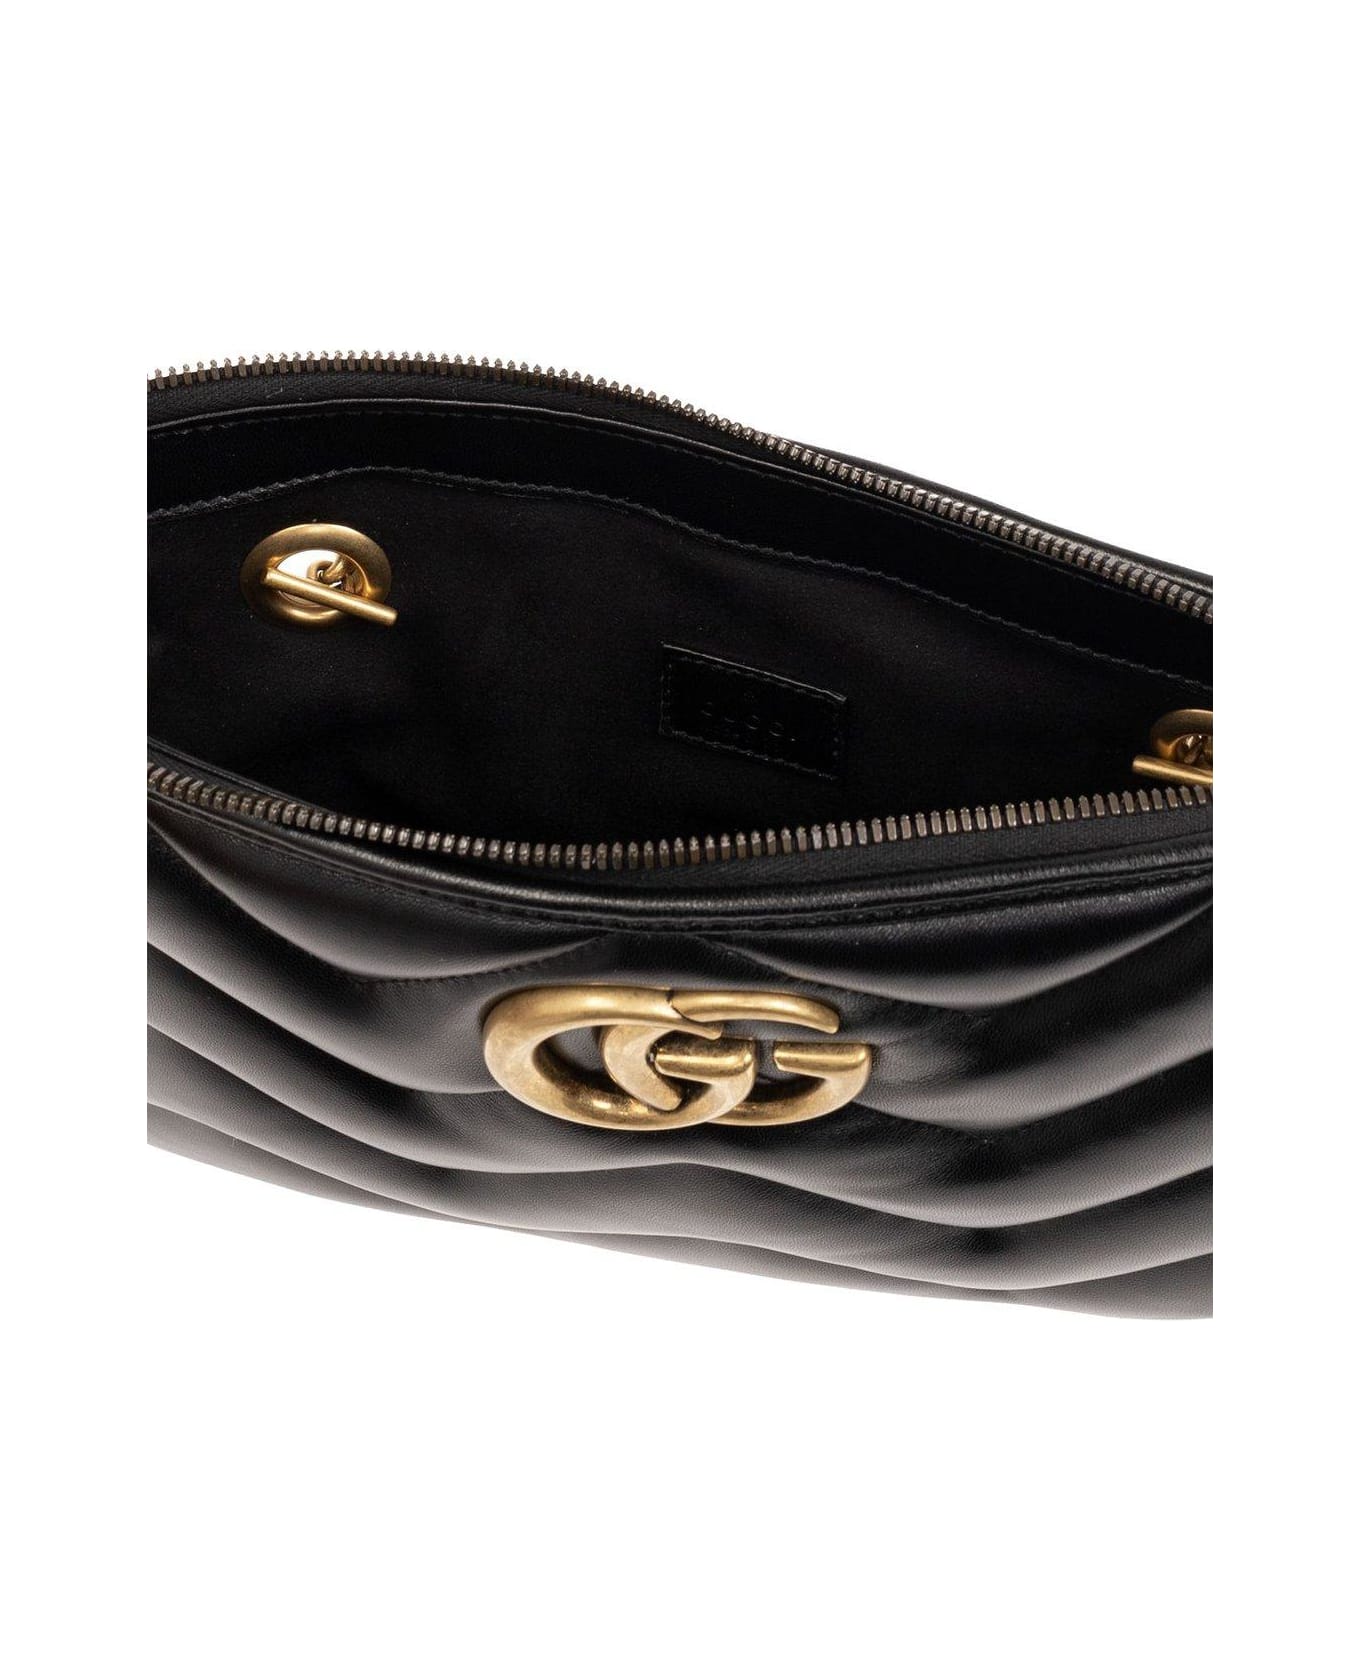 Gucci Gg Marmont Clutch Bag - Black トートバッグ